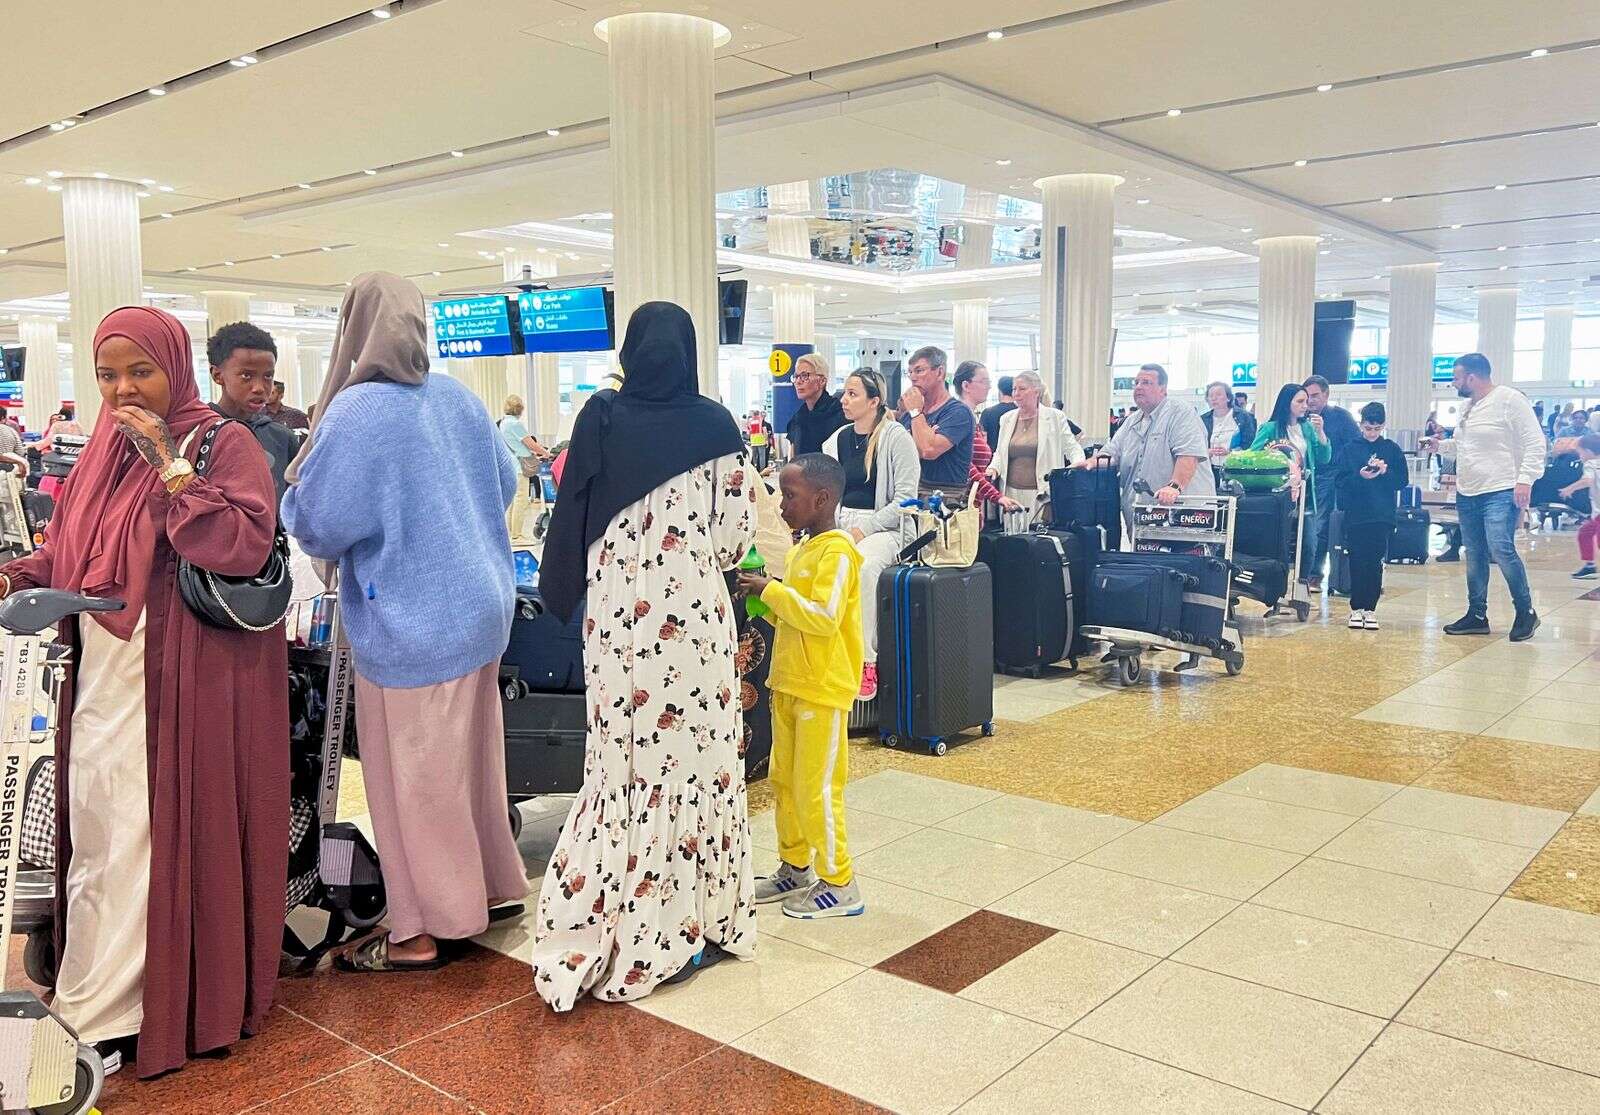 dubai flights: lost baggage? passengers urged to contact airlines as dxb faces backlog